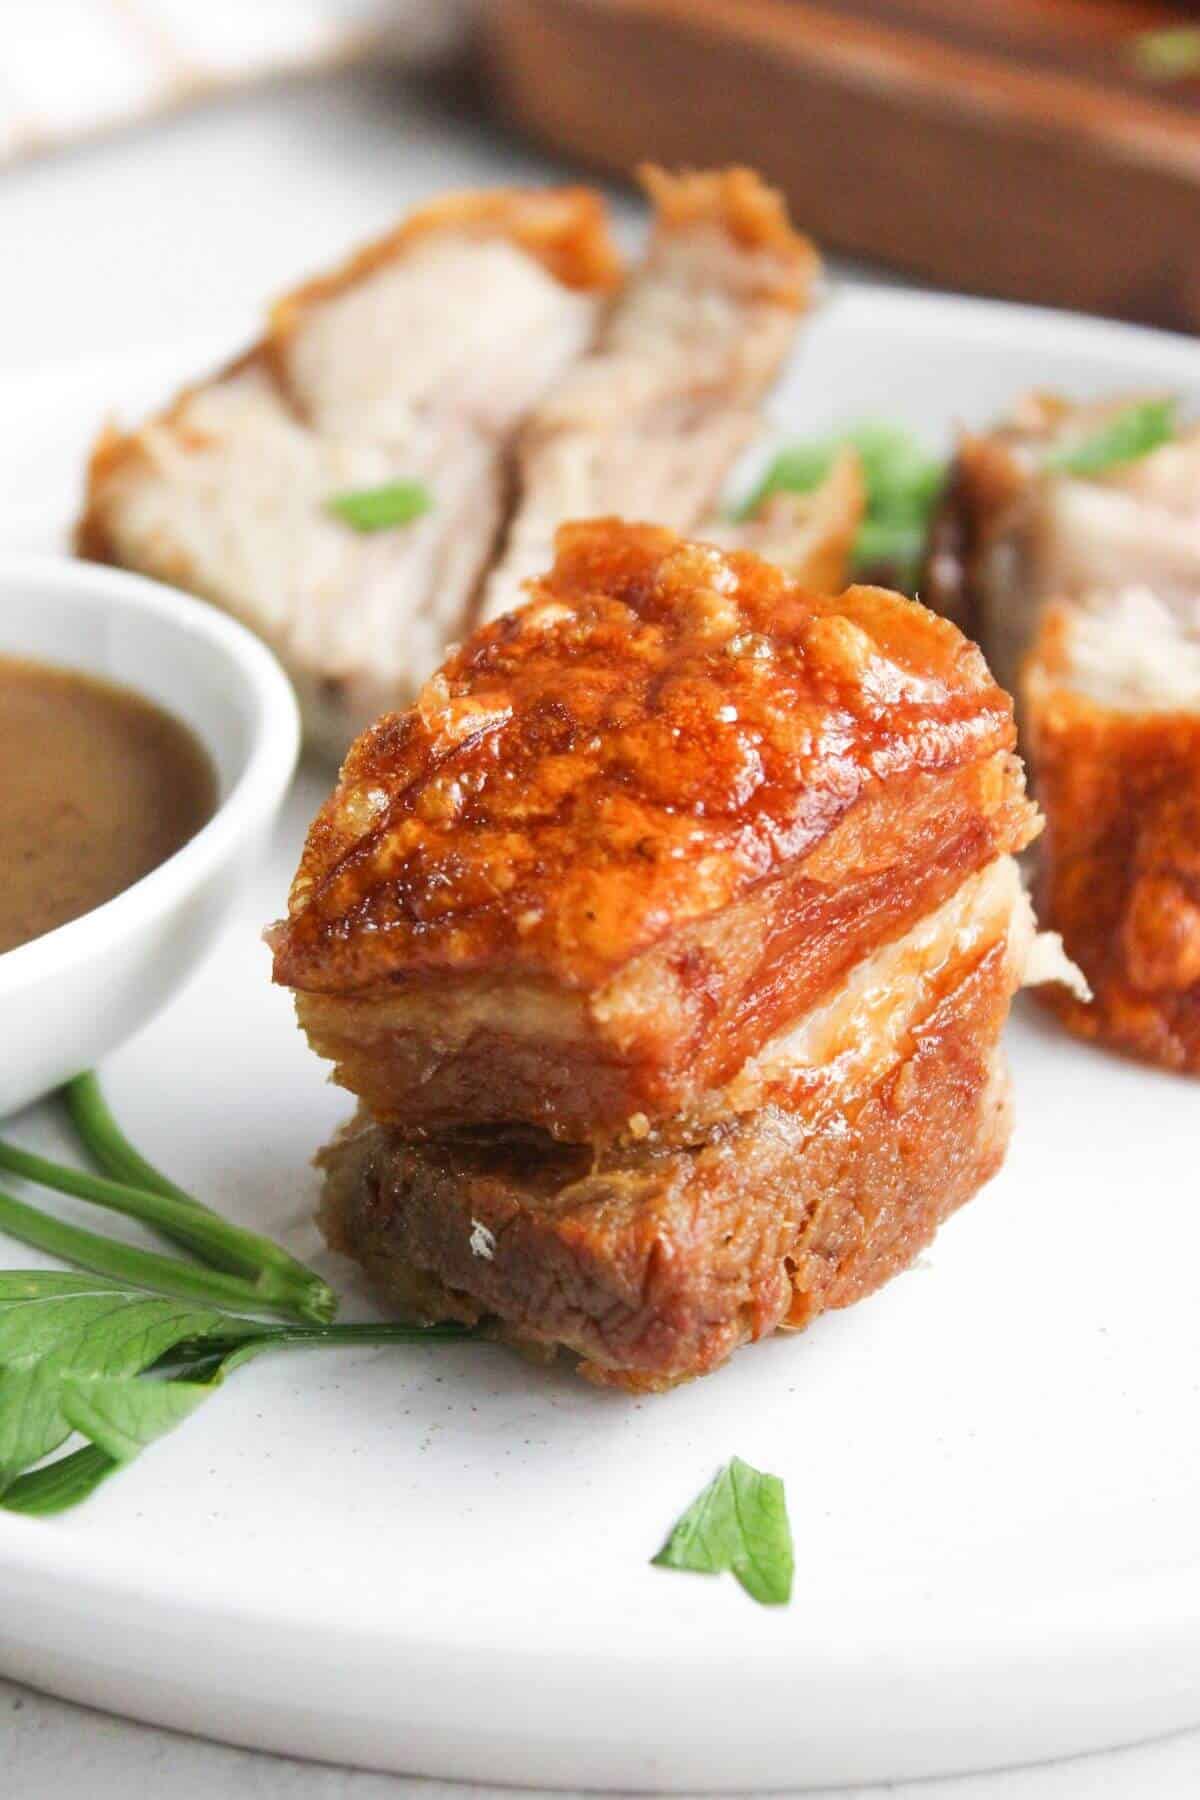 Lechon kawali with sauce on a white plate.